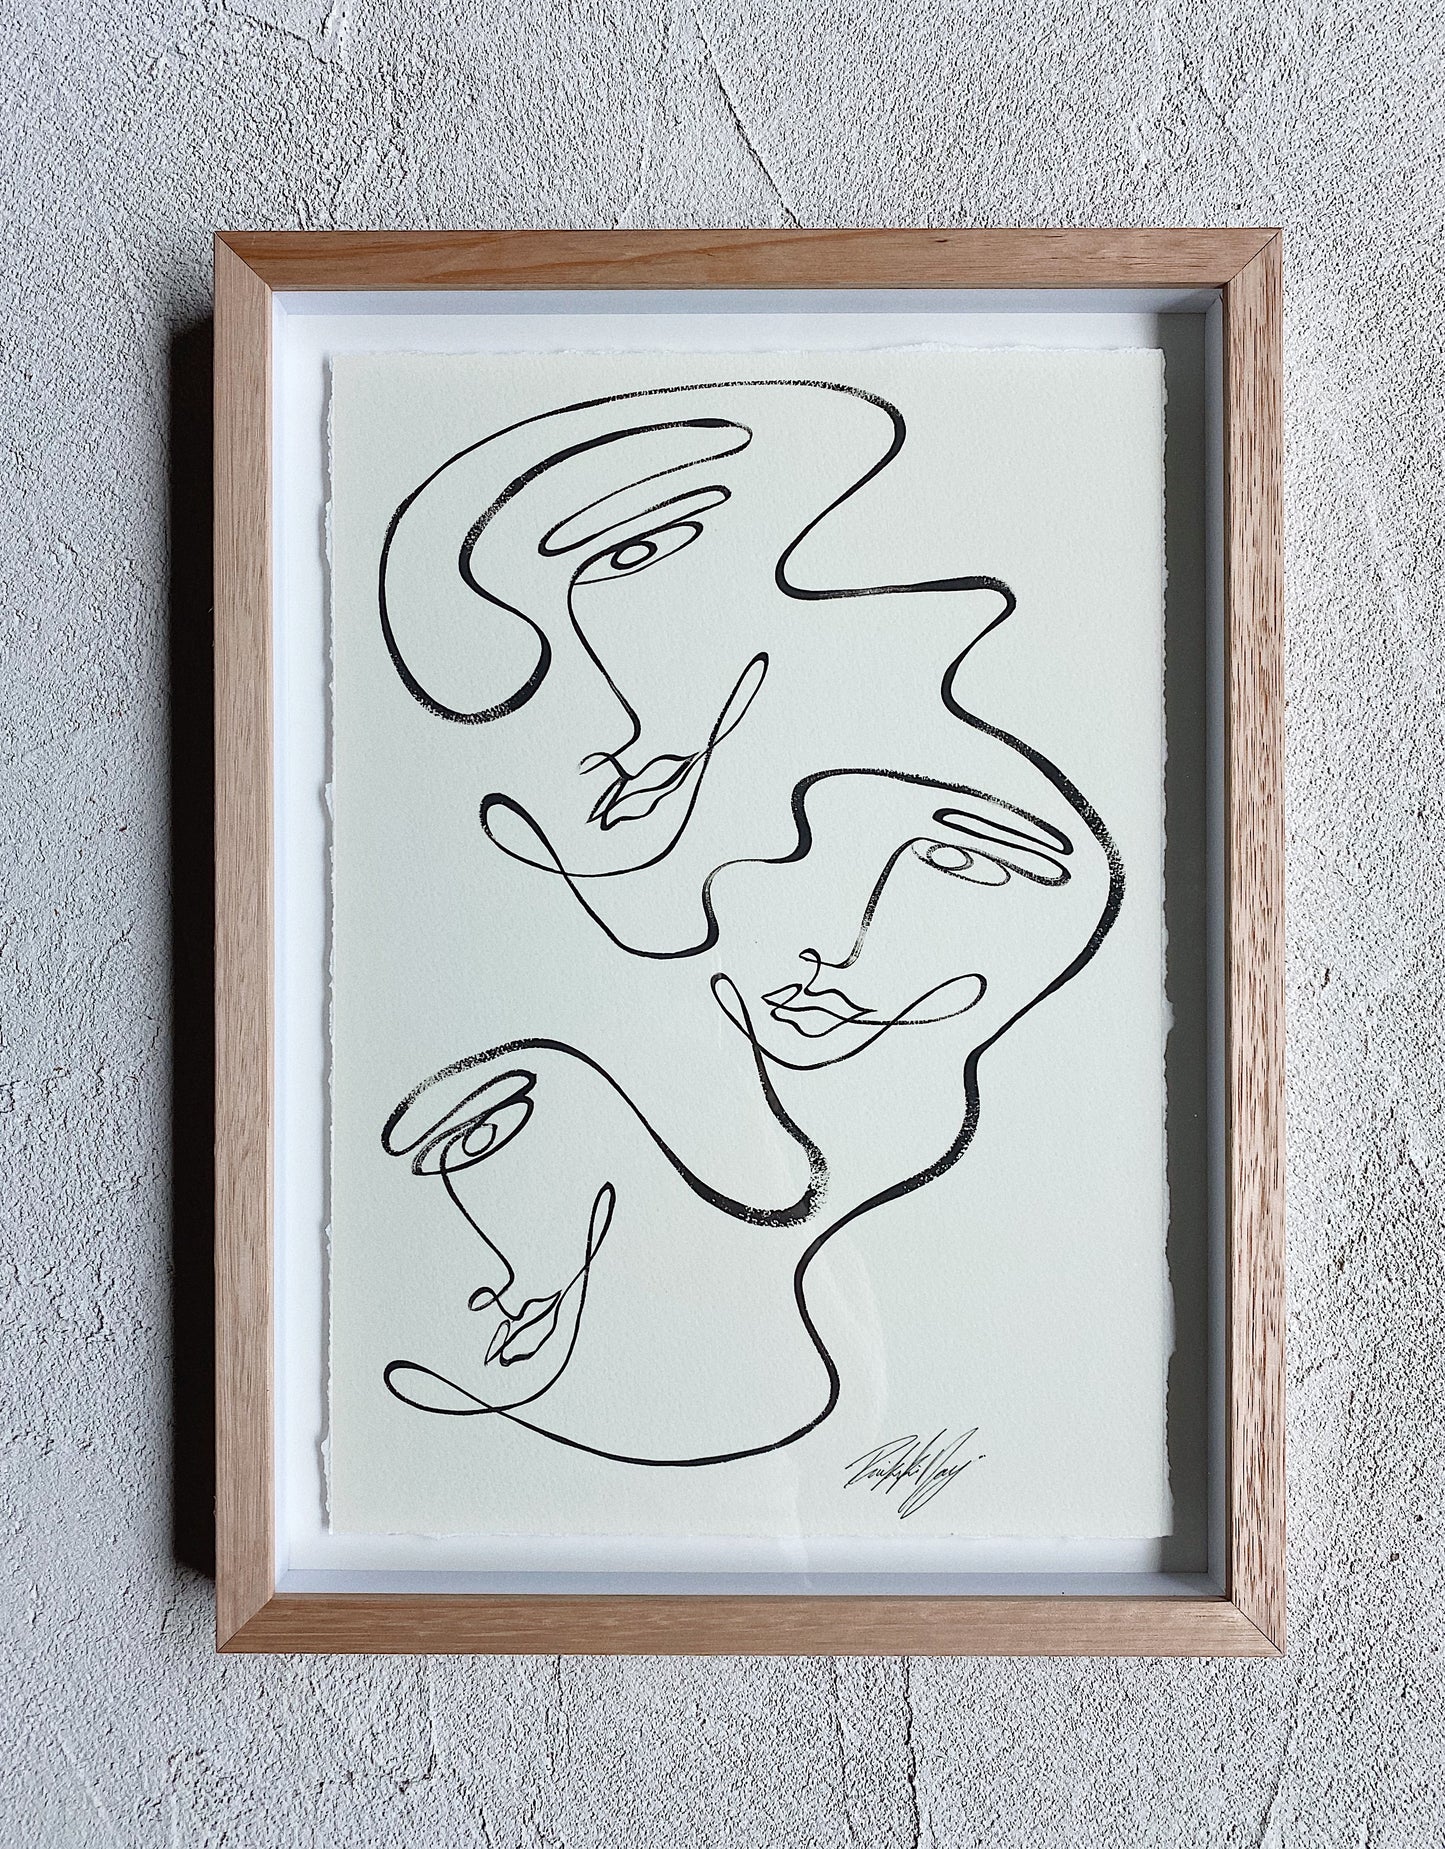 “Three of us” By Rikki Day ~ Float framed in Tasmanian Oak, limited edition